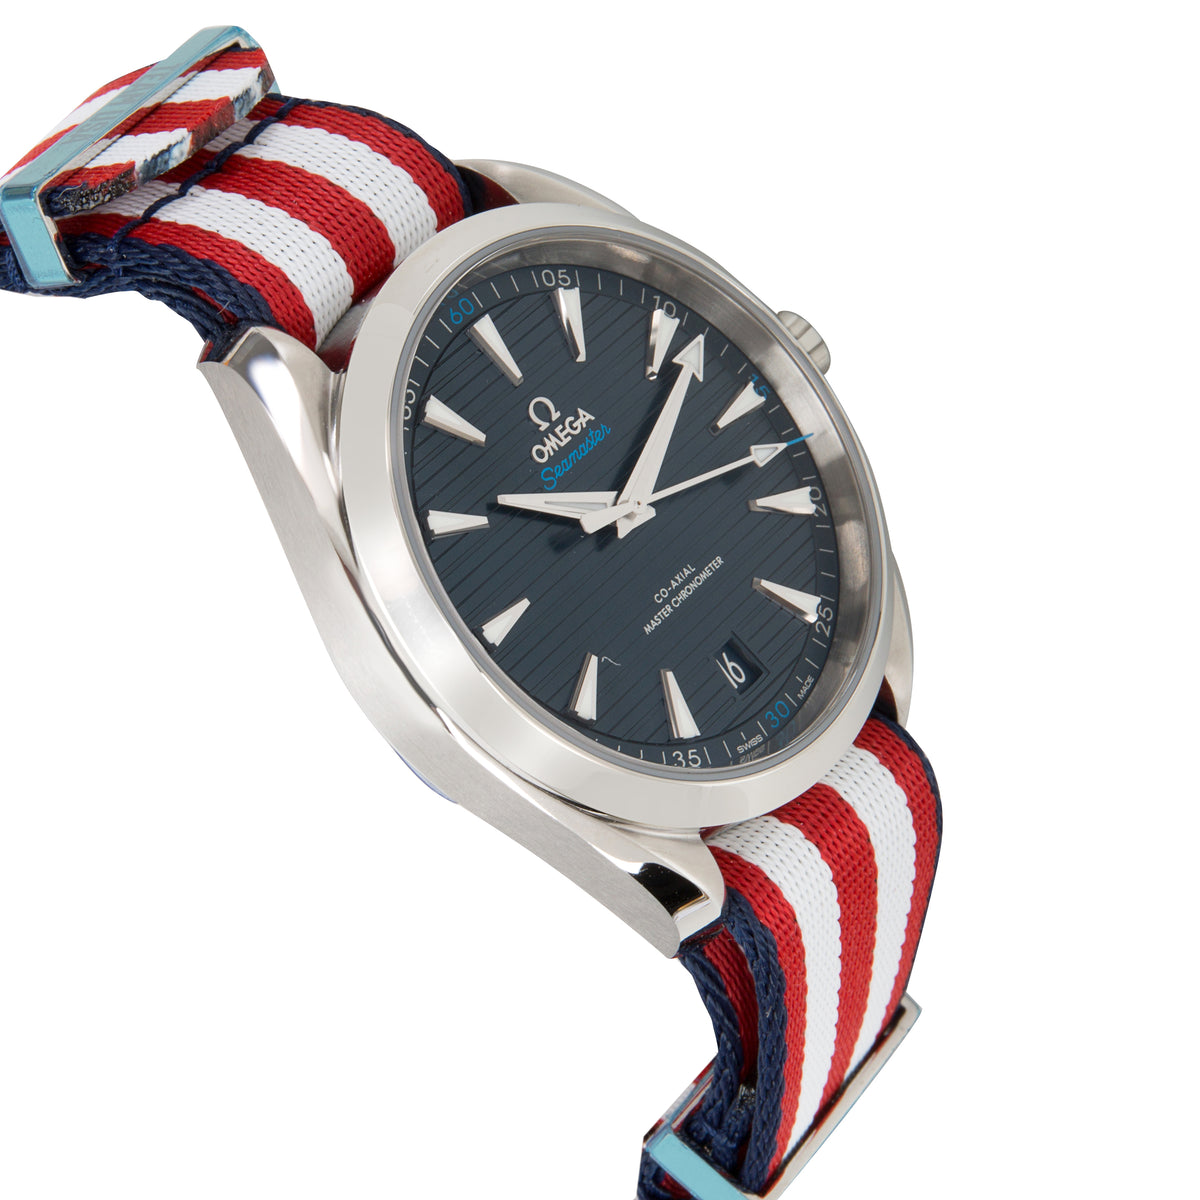 SPECIAL EDITION Omega Seamaster 220.12.41.21.03.003 Men's Watch